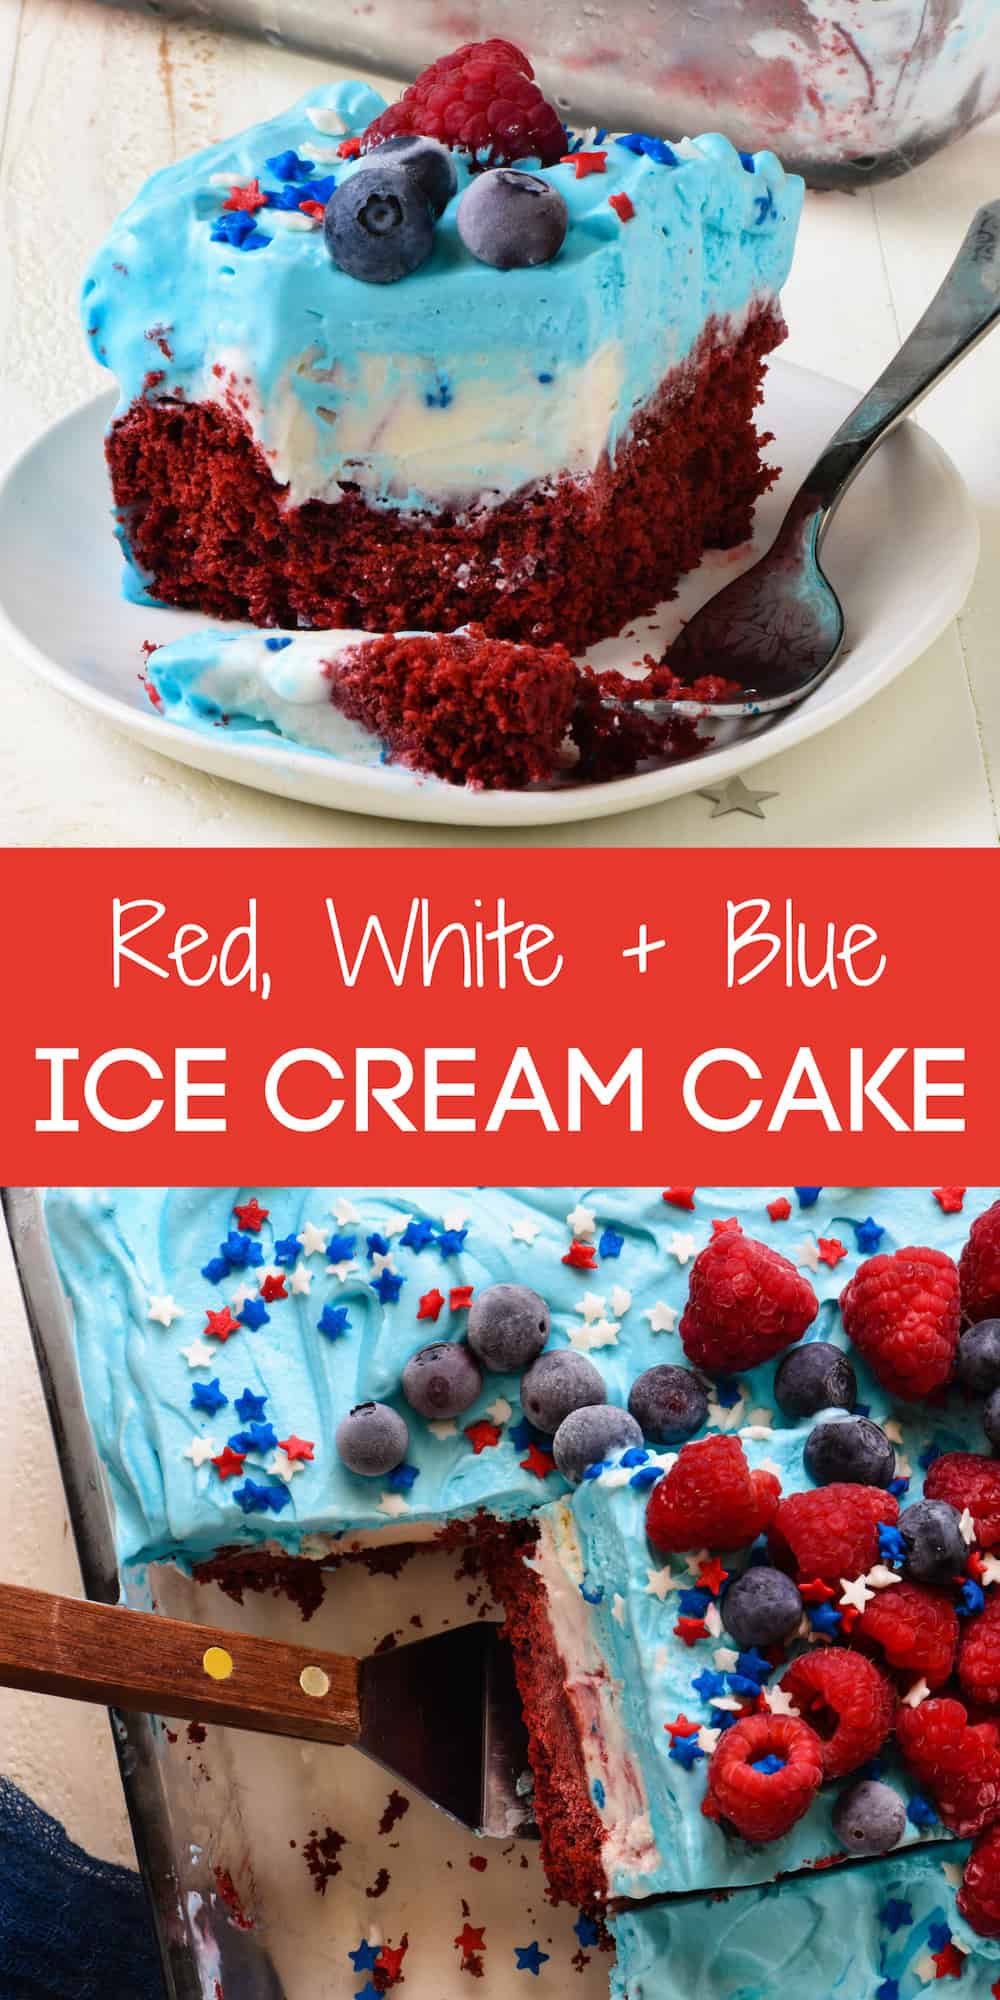 Collage of two ice cream cake images with overlay: Red, White & Blue ICE CREAM CAKE